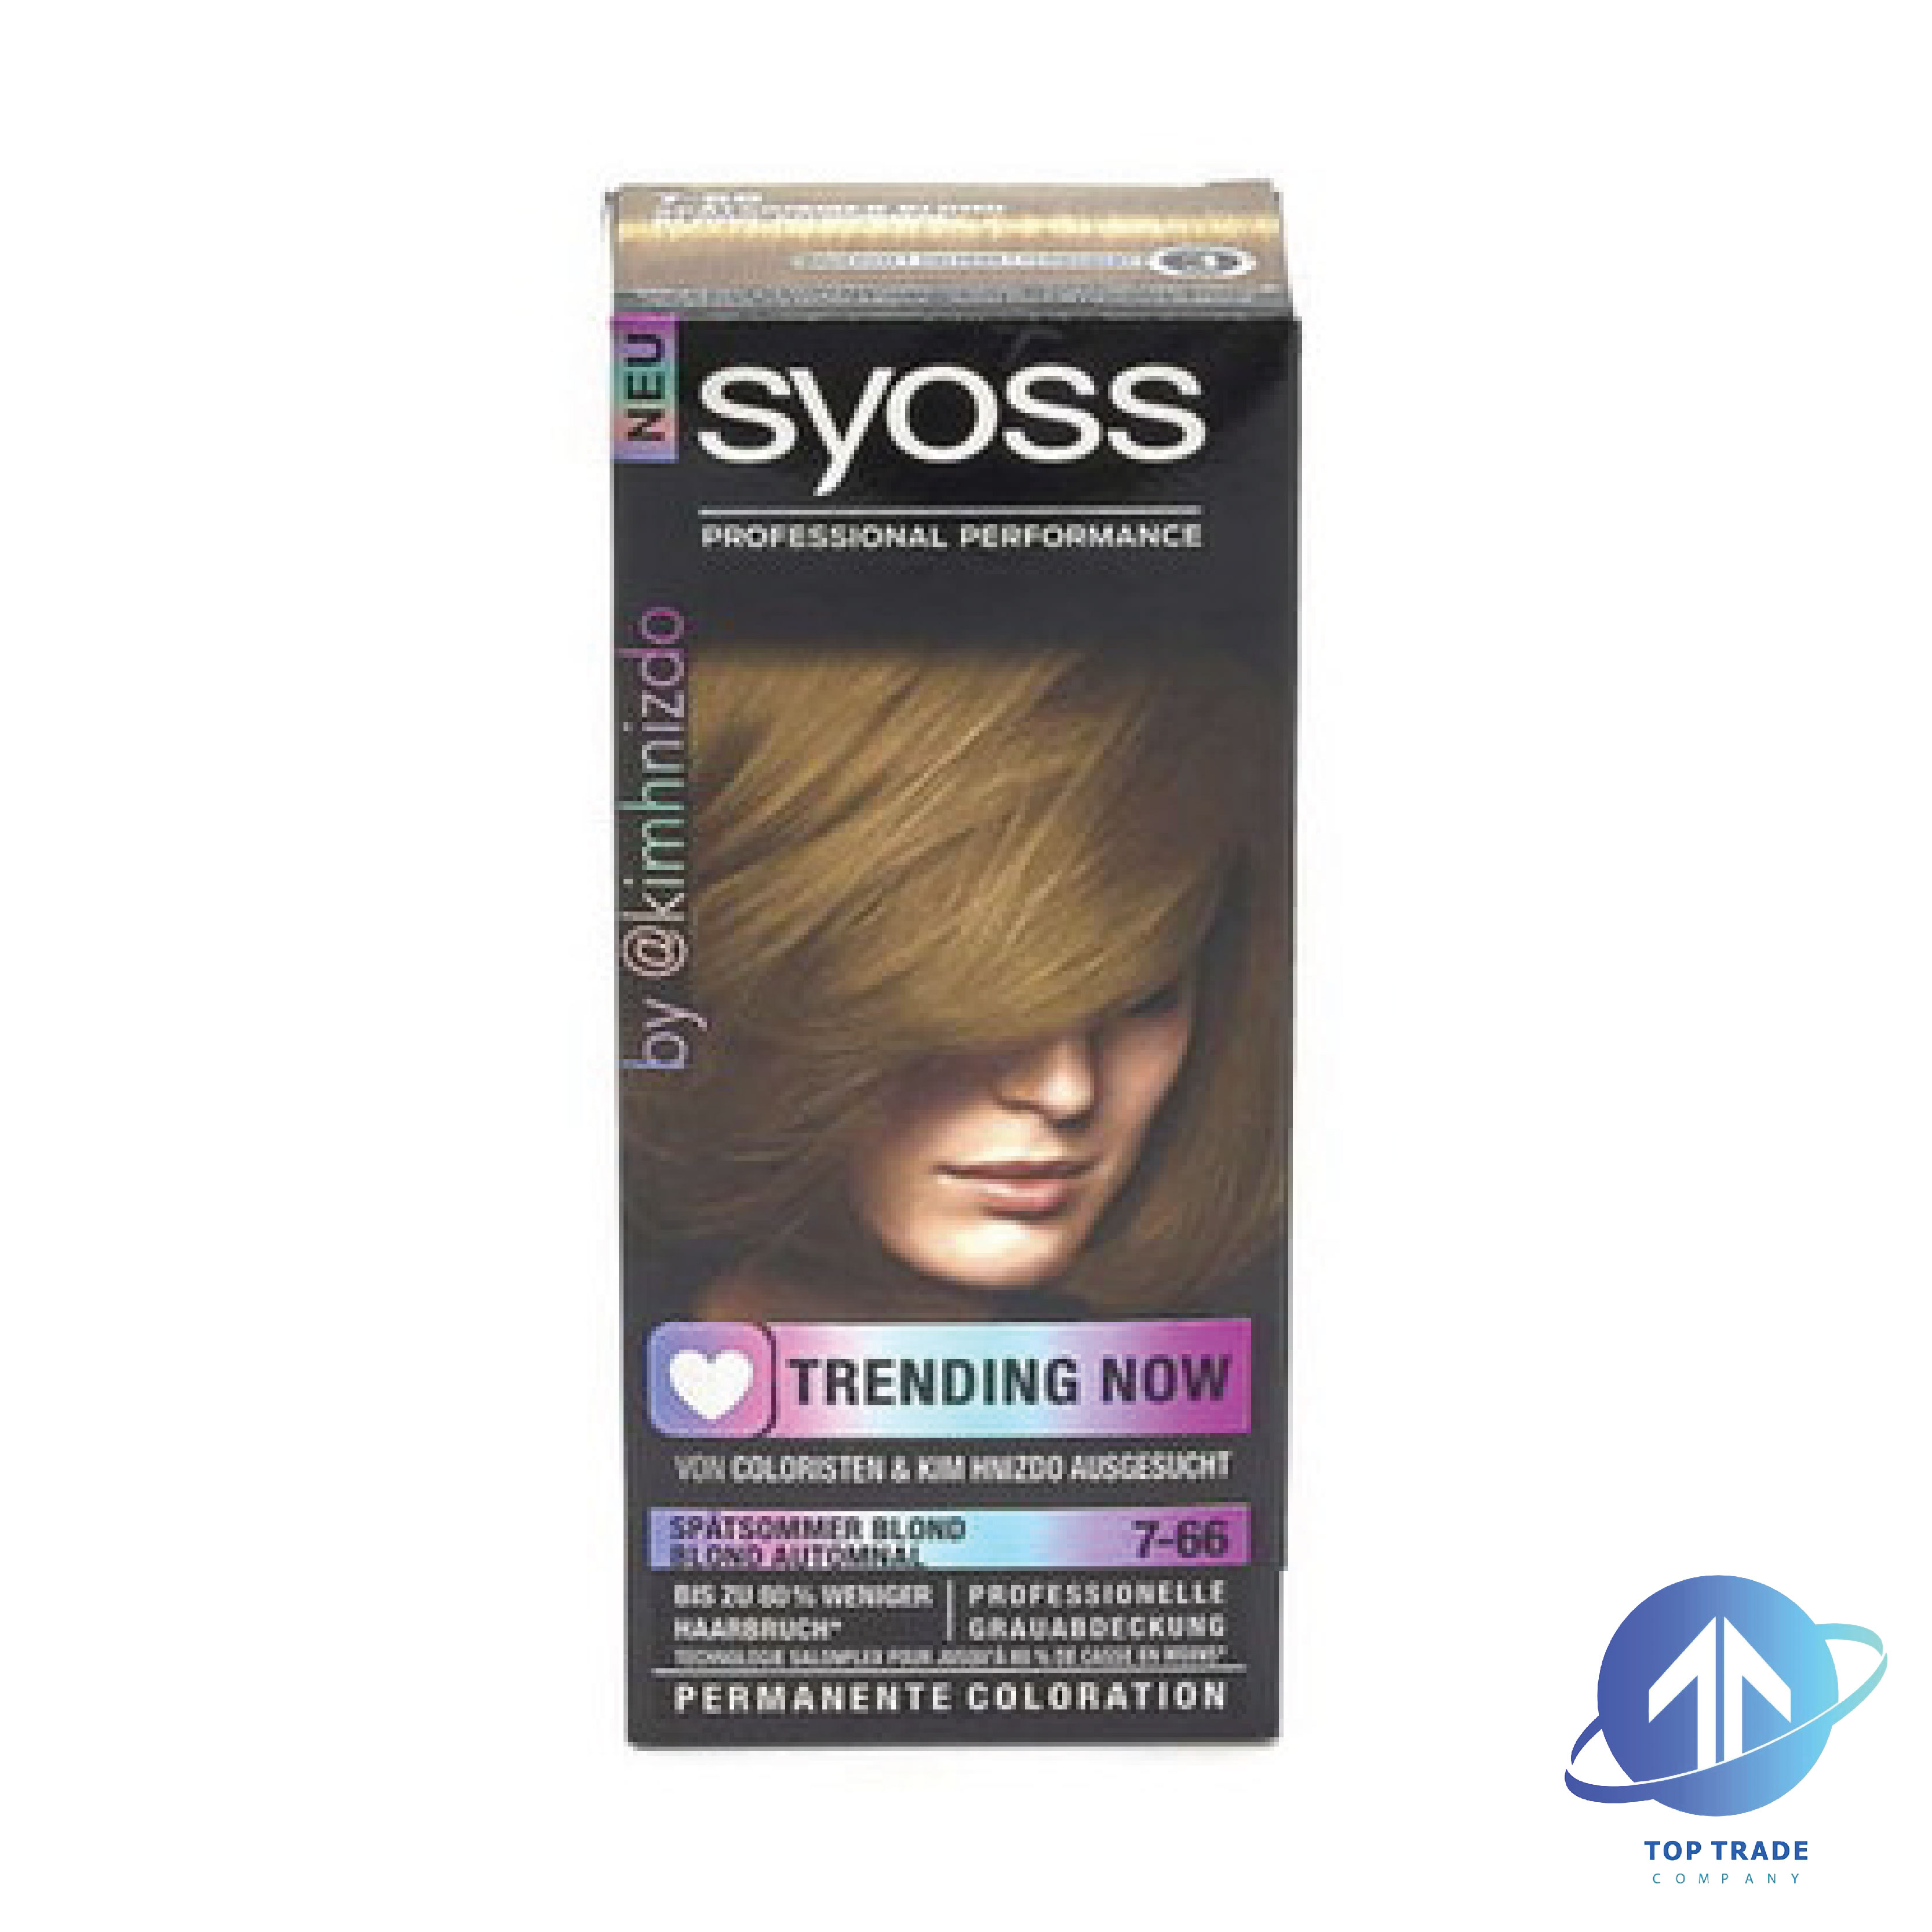 Syoss permanent hair coloring 7-66 autumnal blond